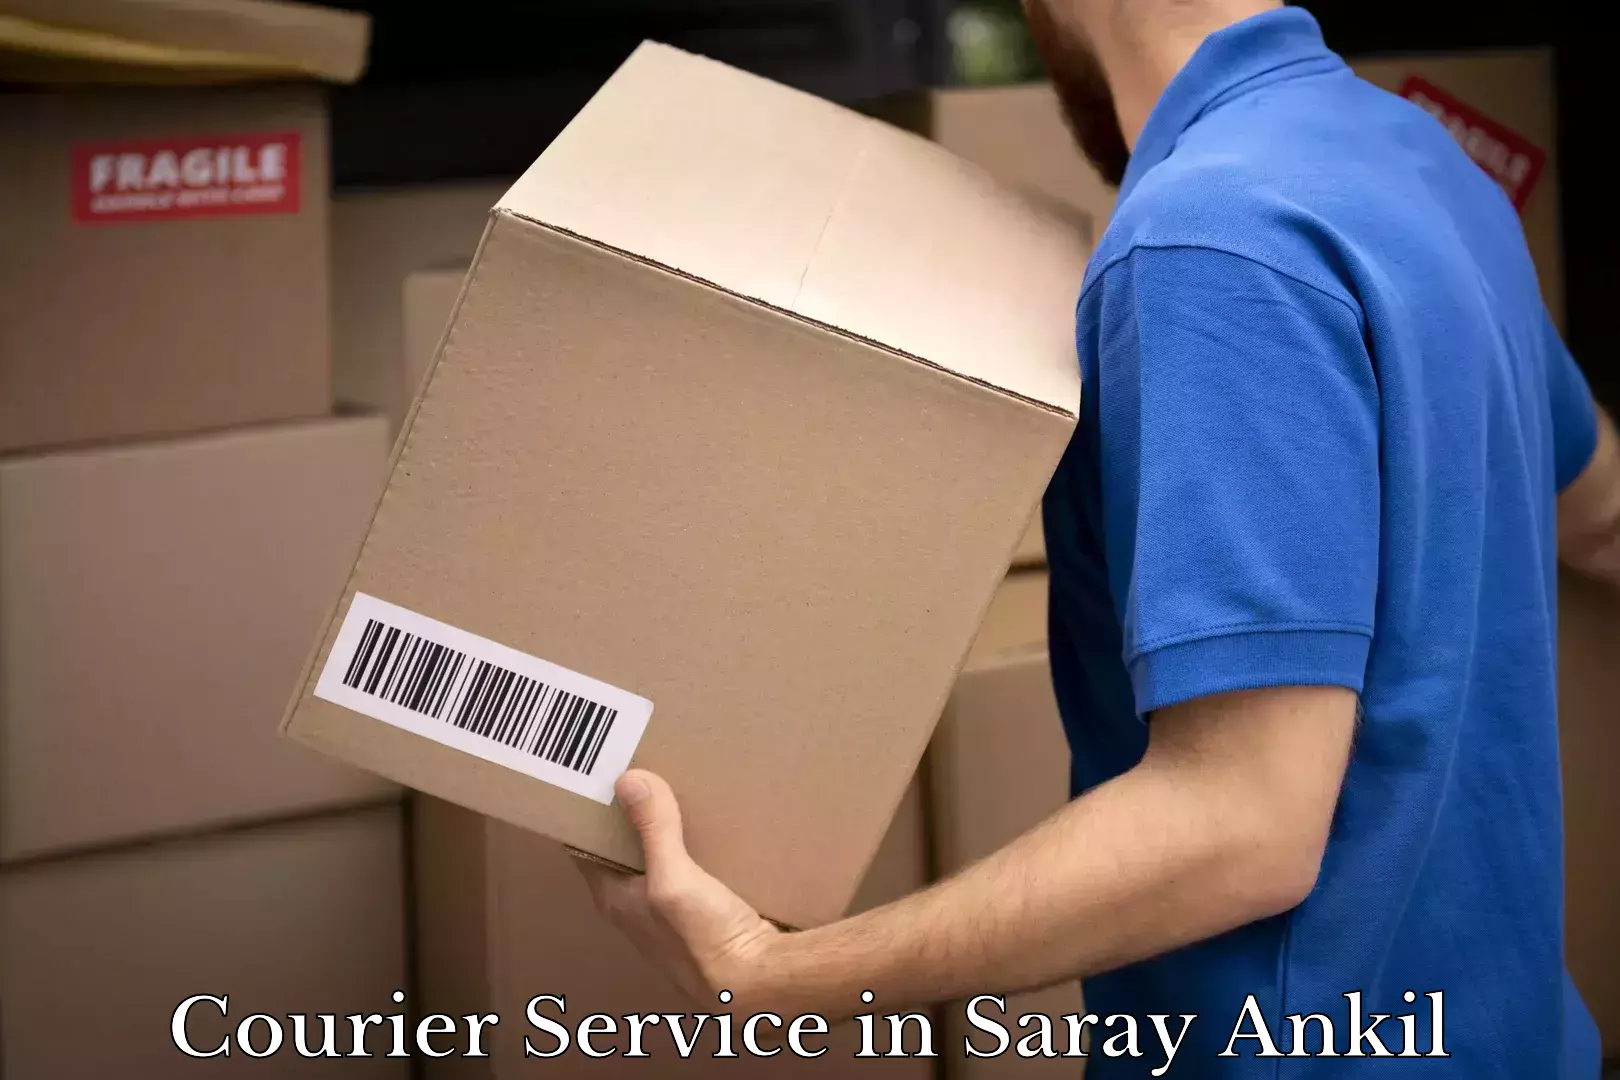 Lightweight parcel options in Saray Ankil